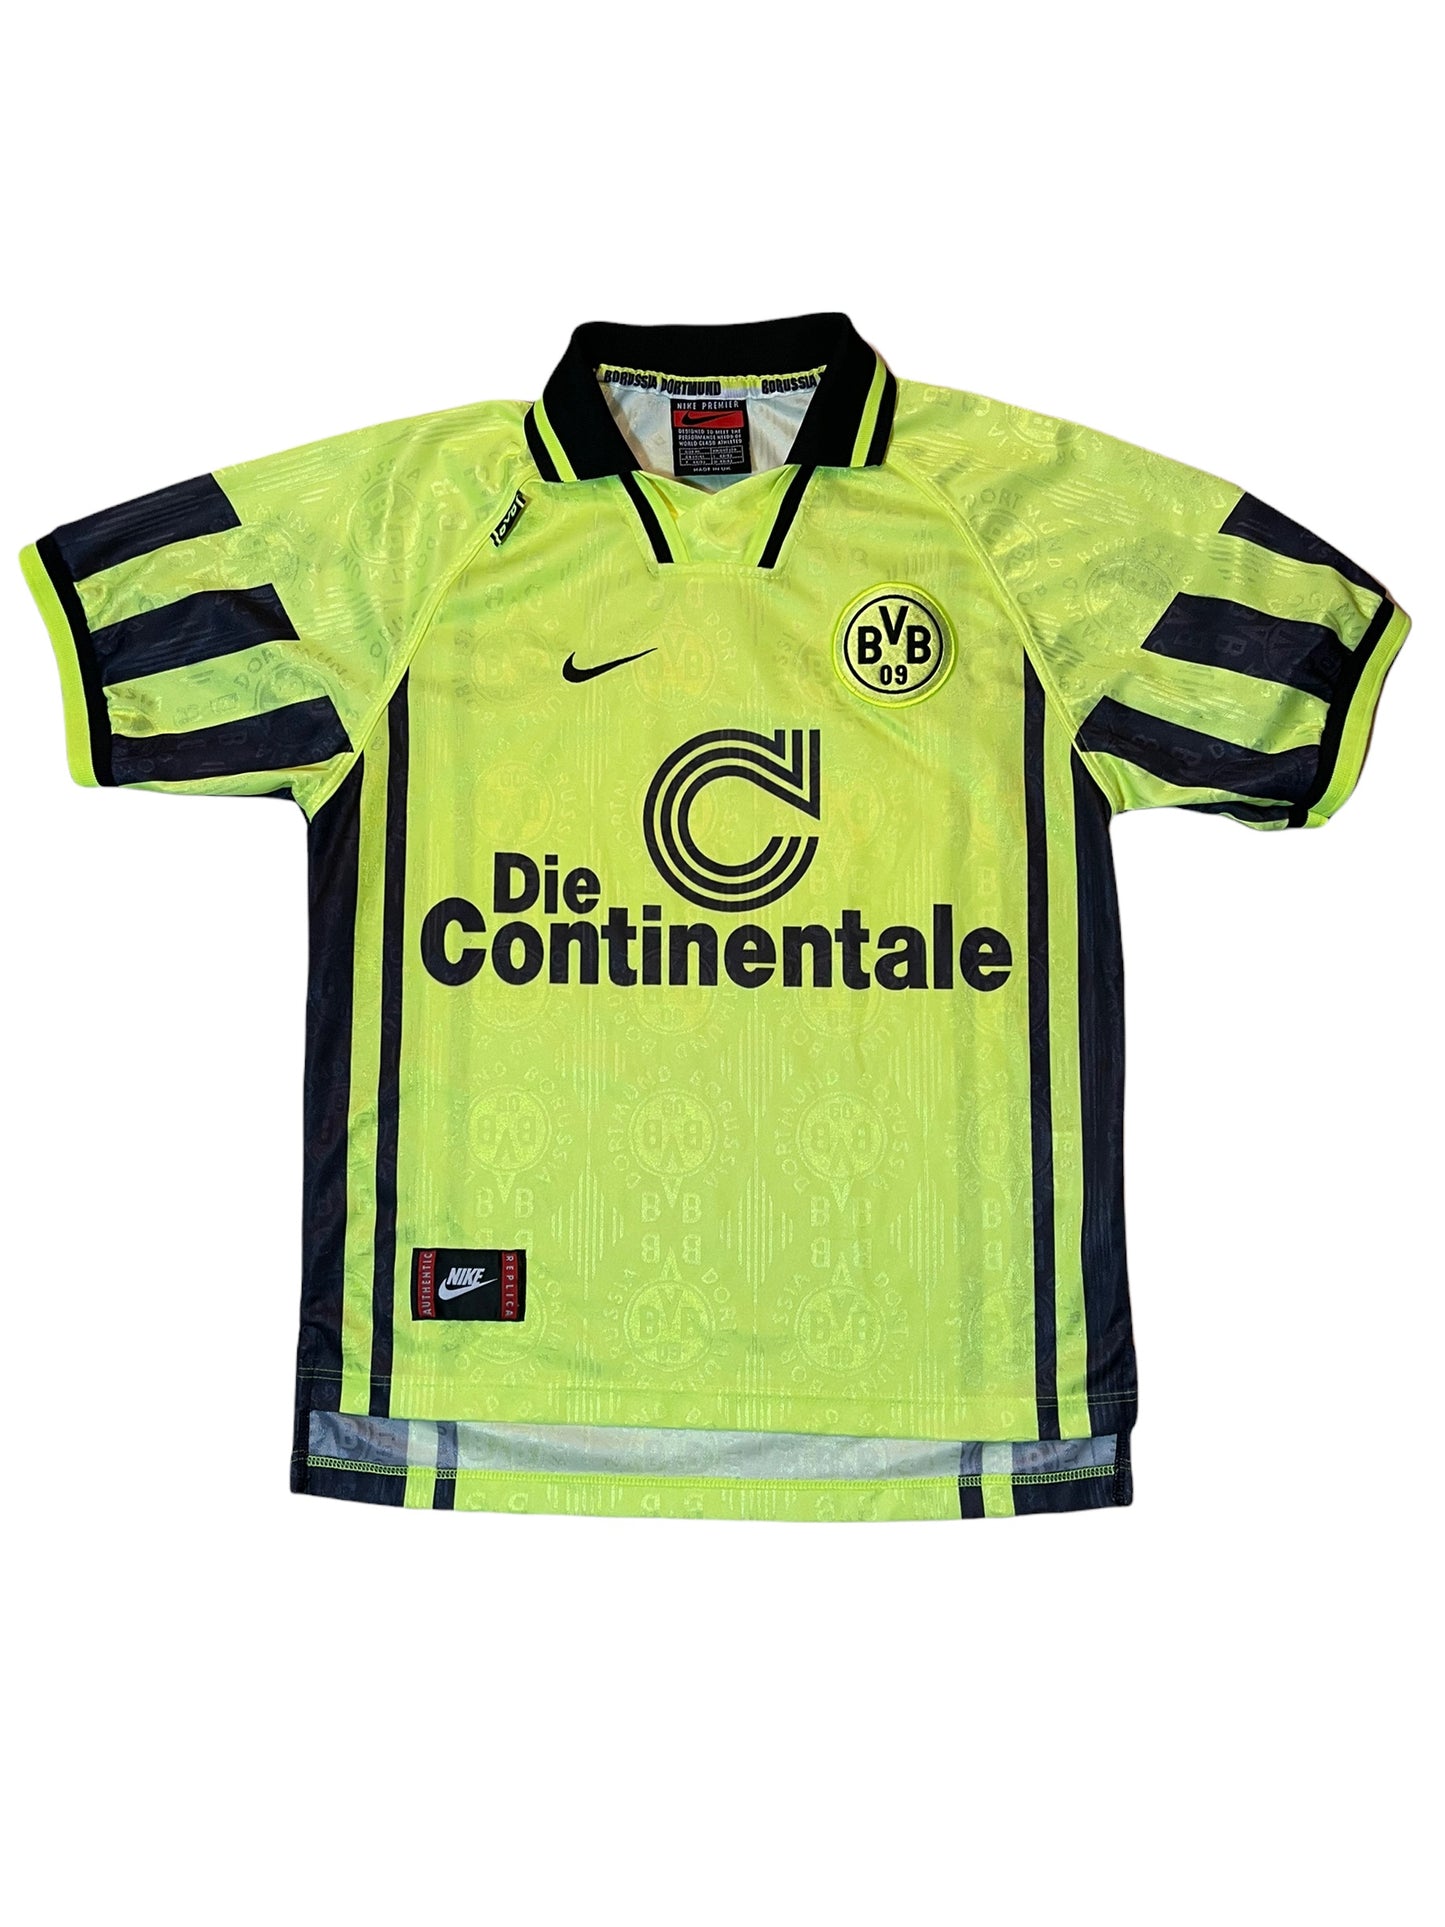 Vintage BVB Borrusia Dortmund Nike Premier 1996-1997 Size M Football Shirt Home Die Continentale Made in UK